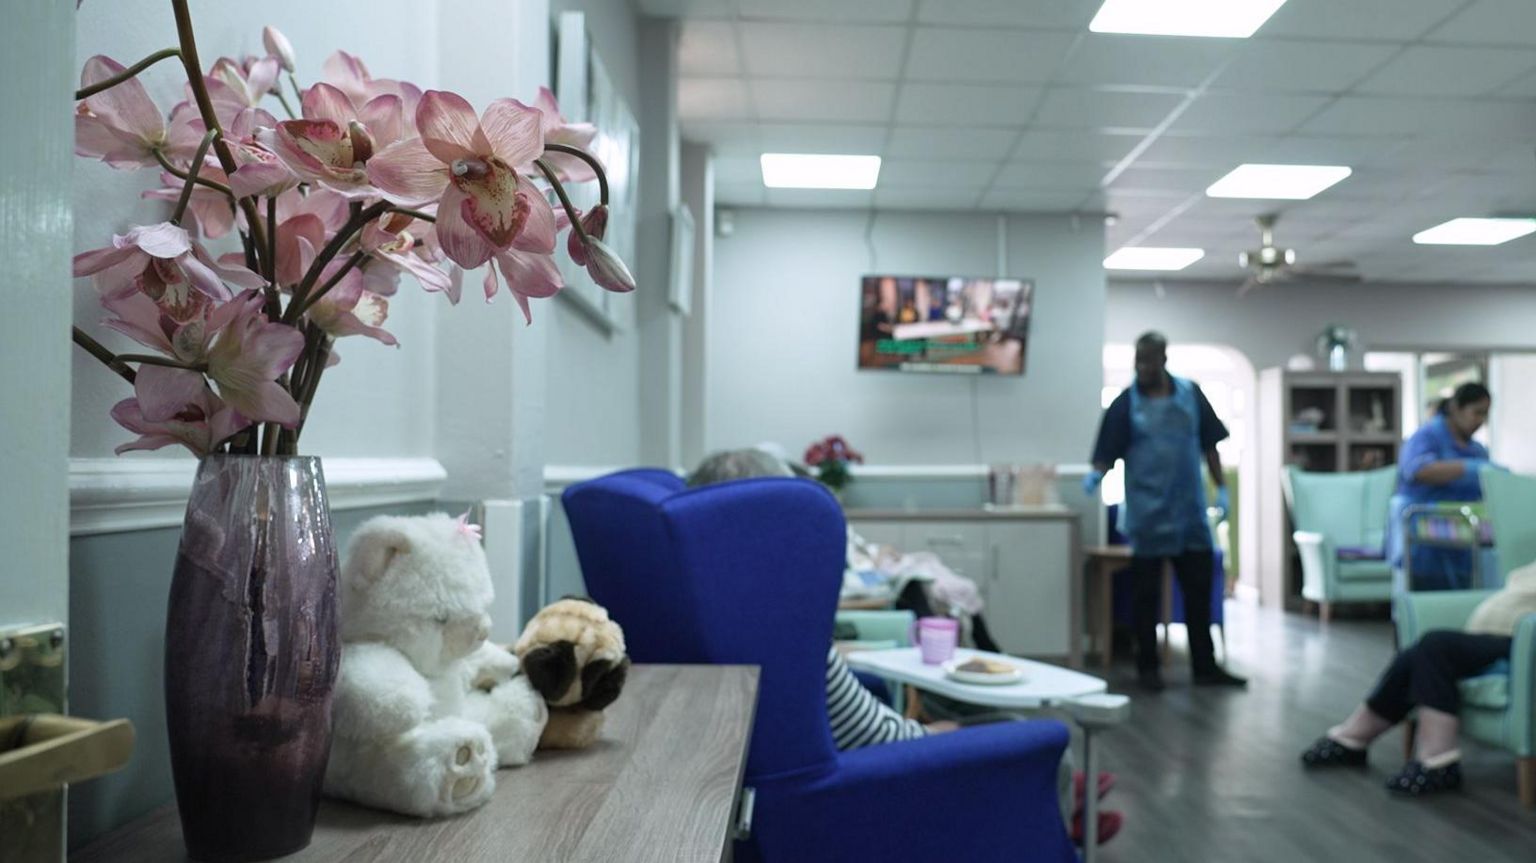 The UK care sector has been facing staff shortages